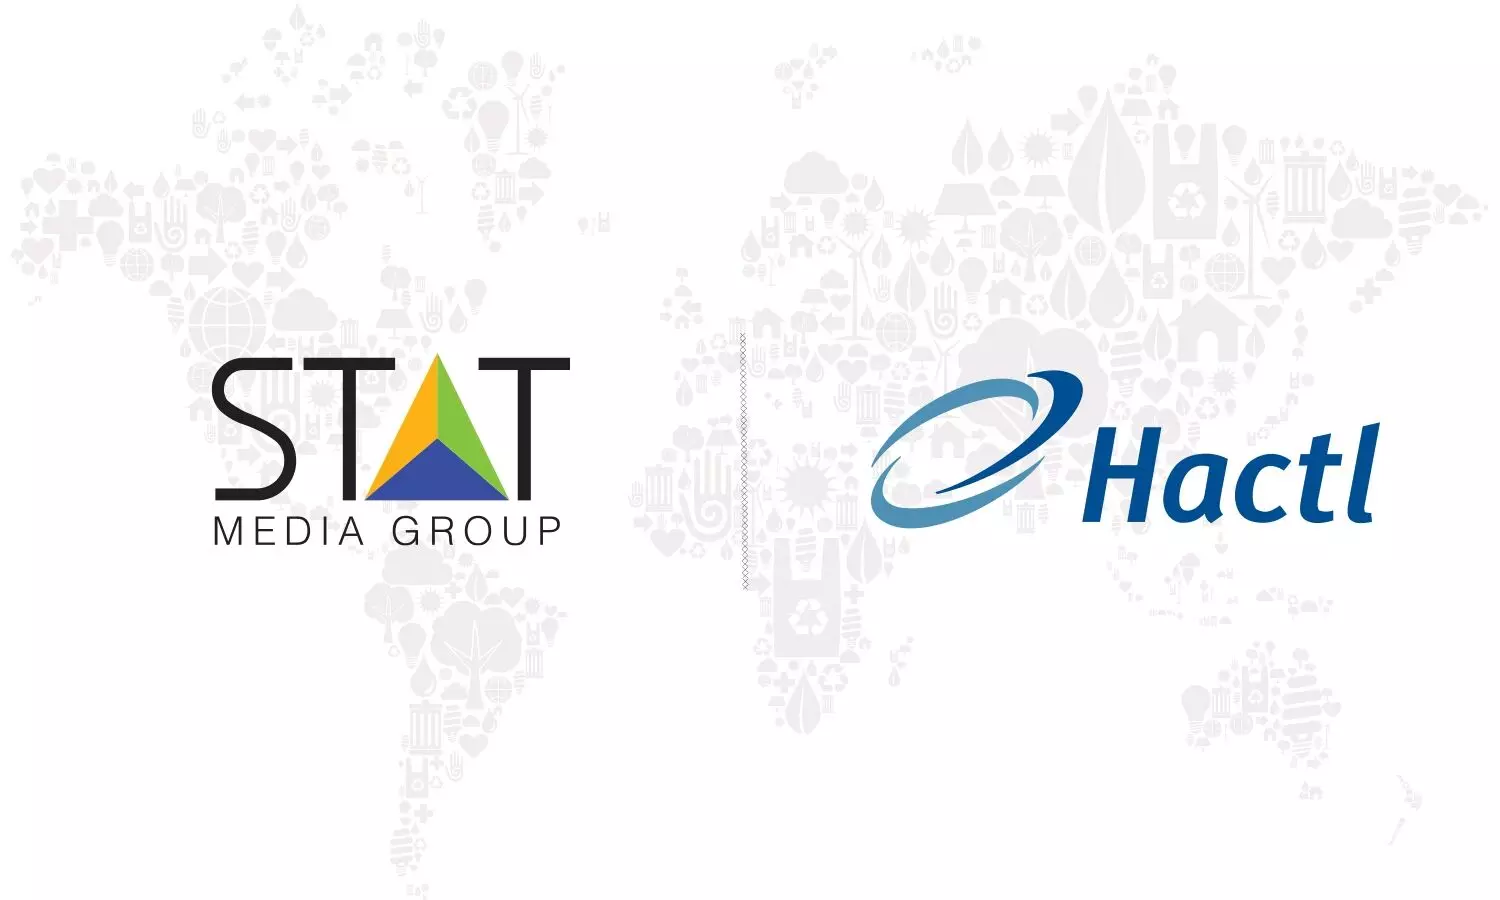 Hactl join hands with STAT Media as Sustainability Partner for events